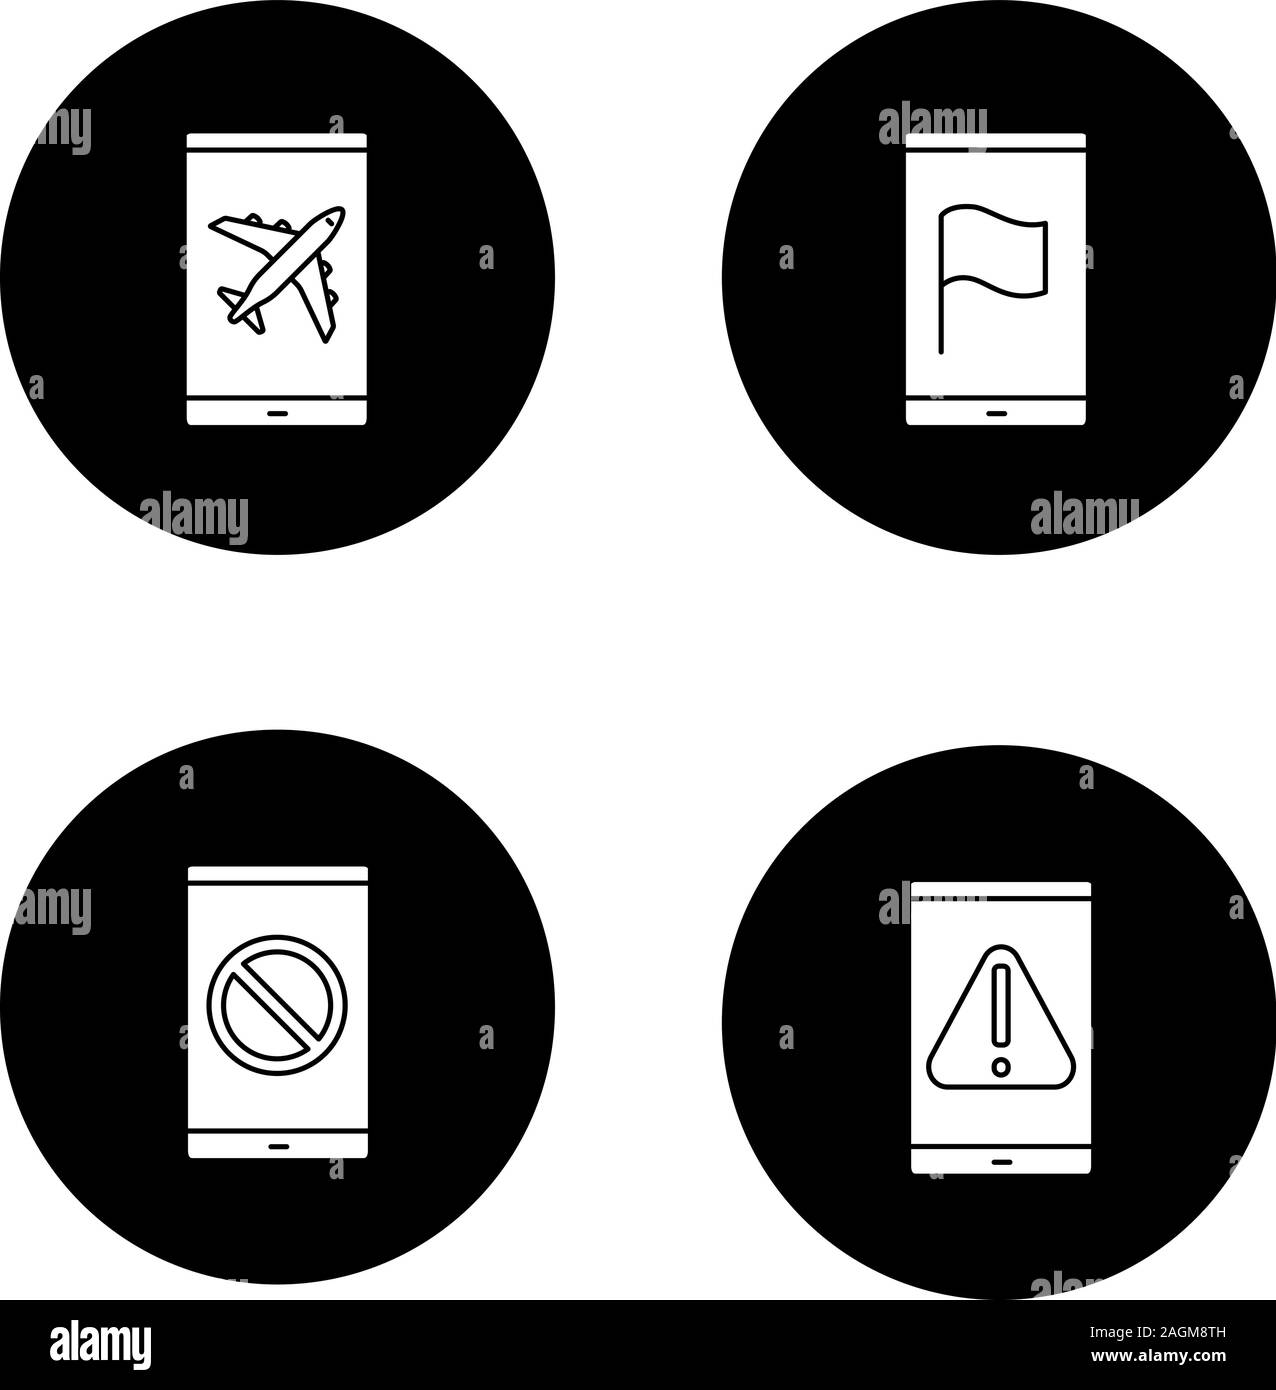 Smartphone apps glyph icons set. Flight mode, GPS navigator, error, no signal sign. Vector white silhouettes illustrations in black circles Stock Vector